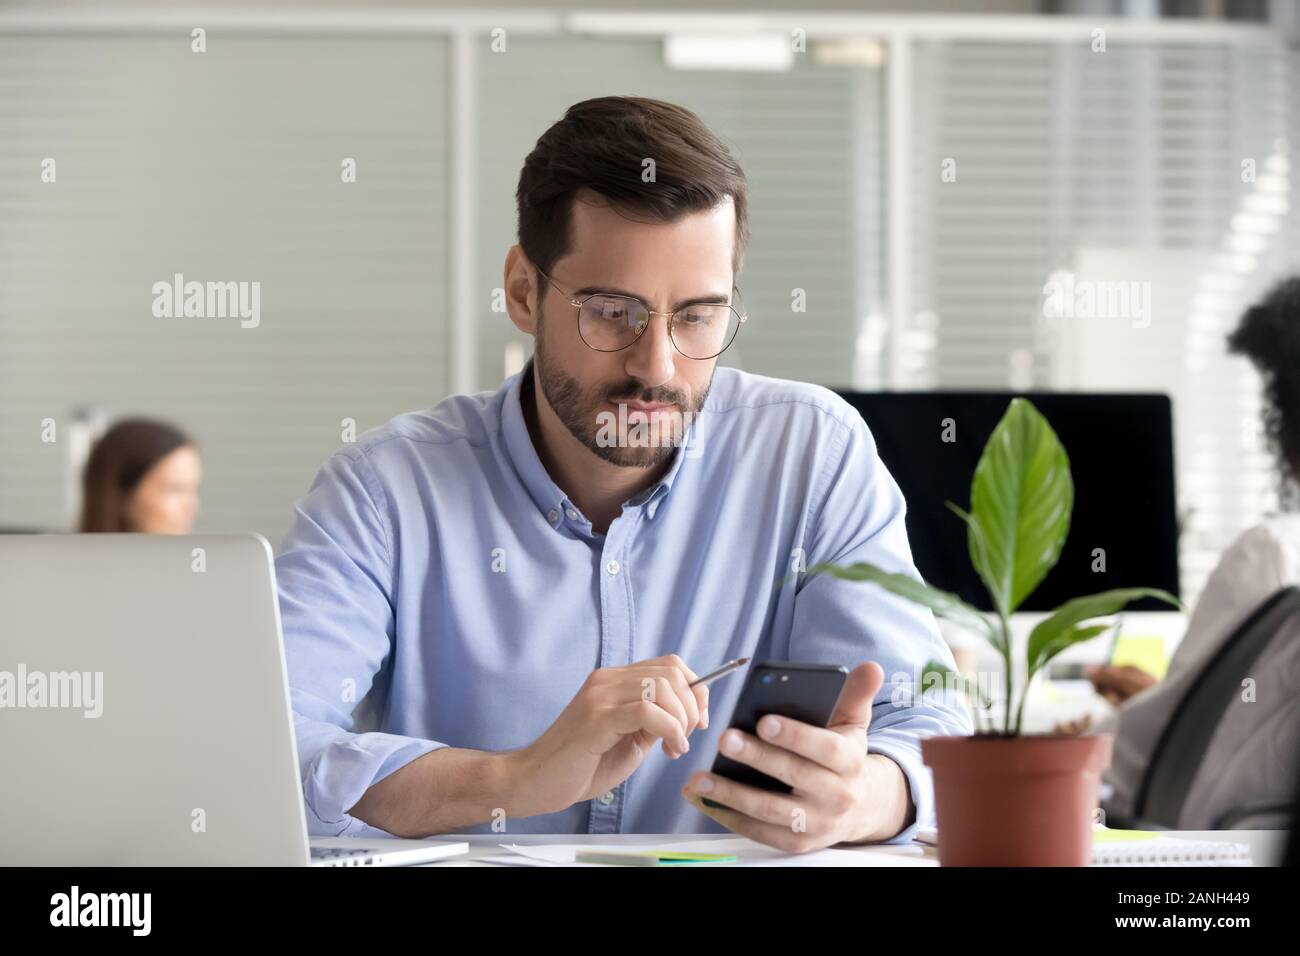 Serious male office manager work in coworking space using smartphone analyzing online market trends, focused man worker reading financial news or brow Stock Photo